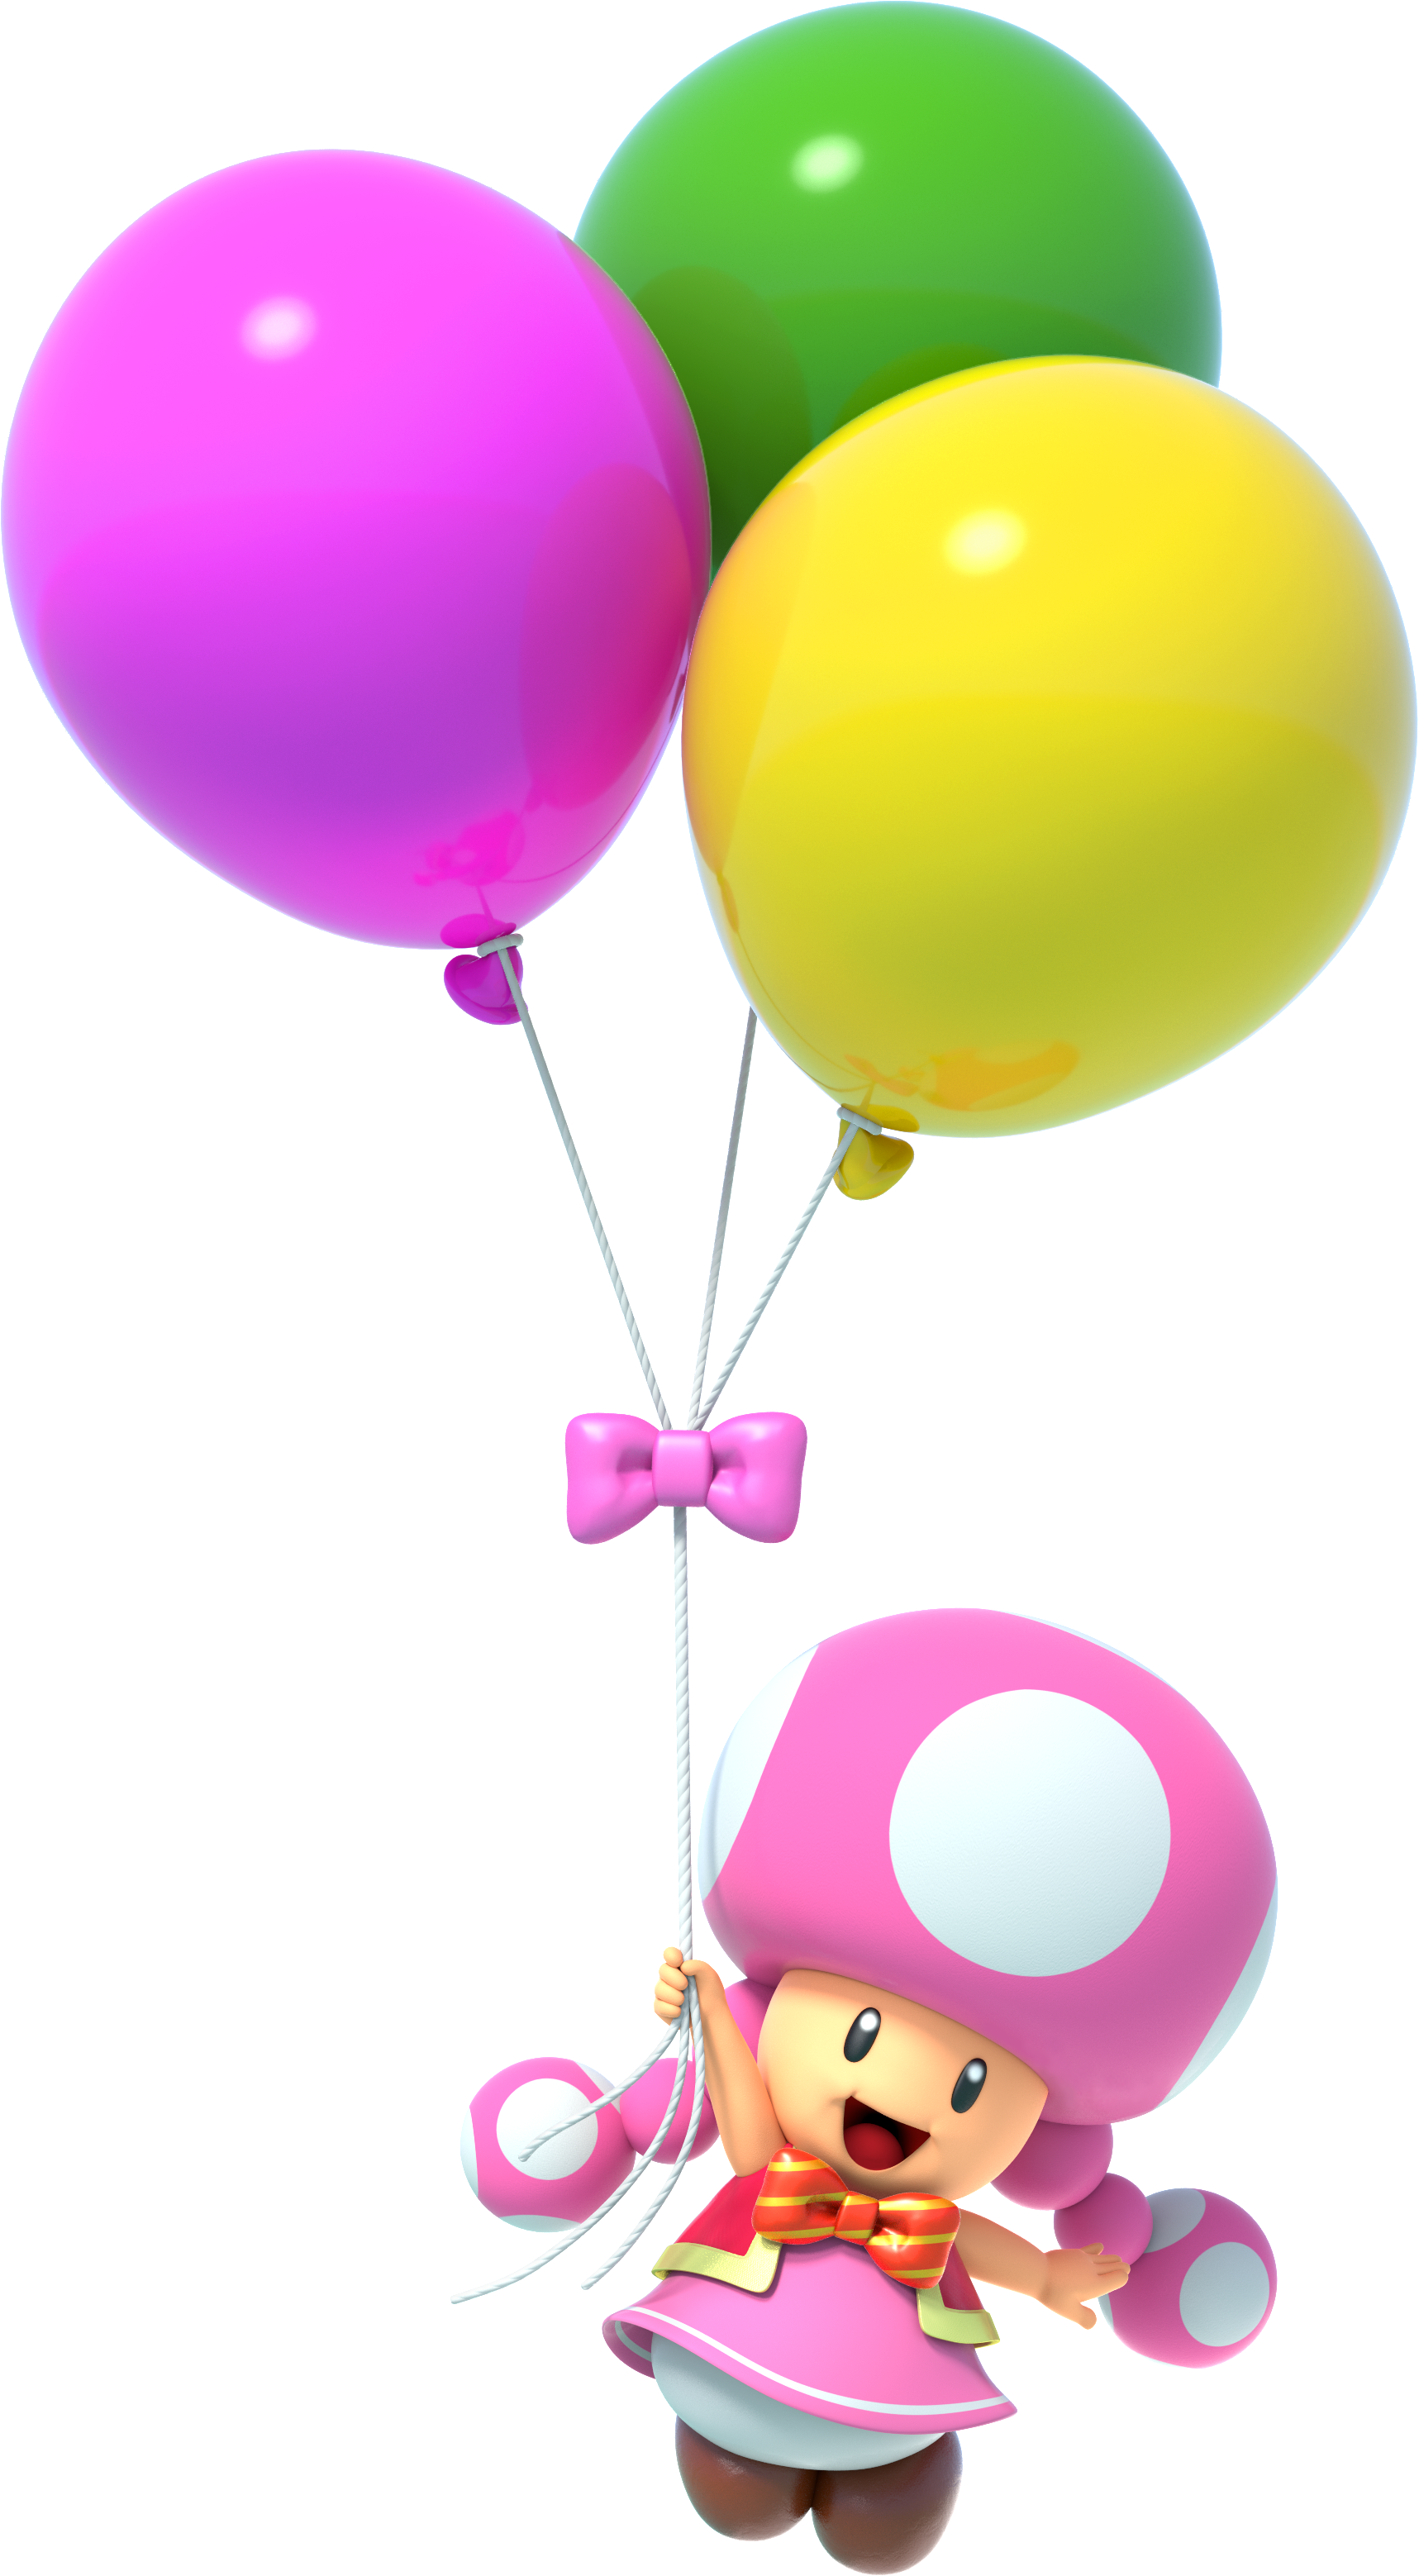 Artwork of Toadette holding onto balloons from Super Mario Party